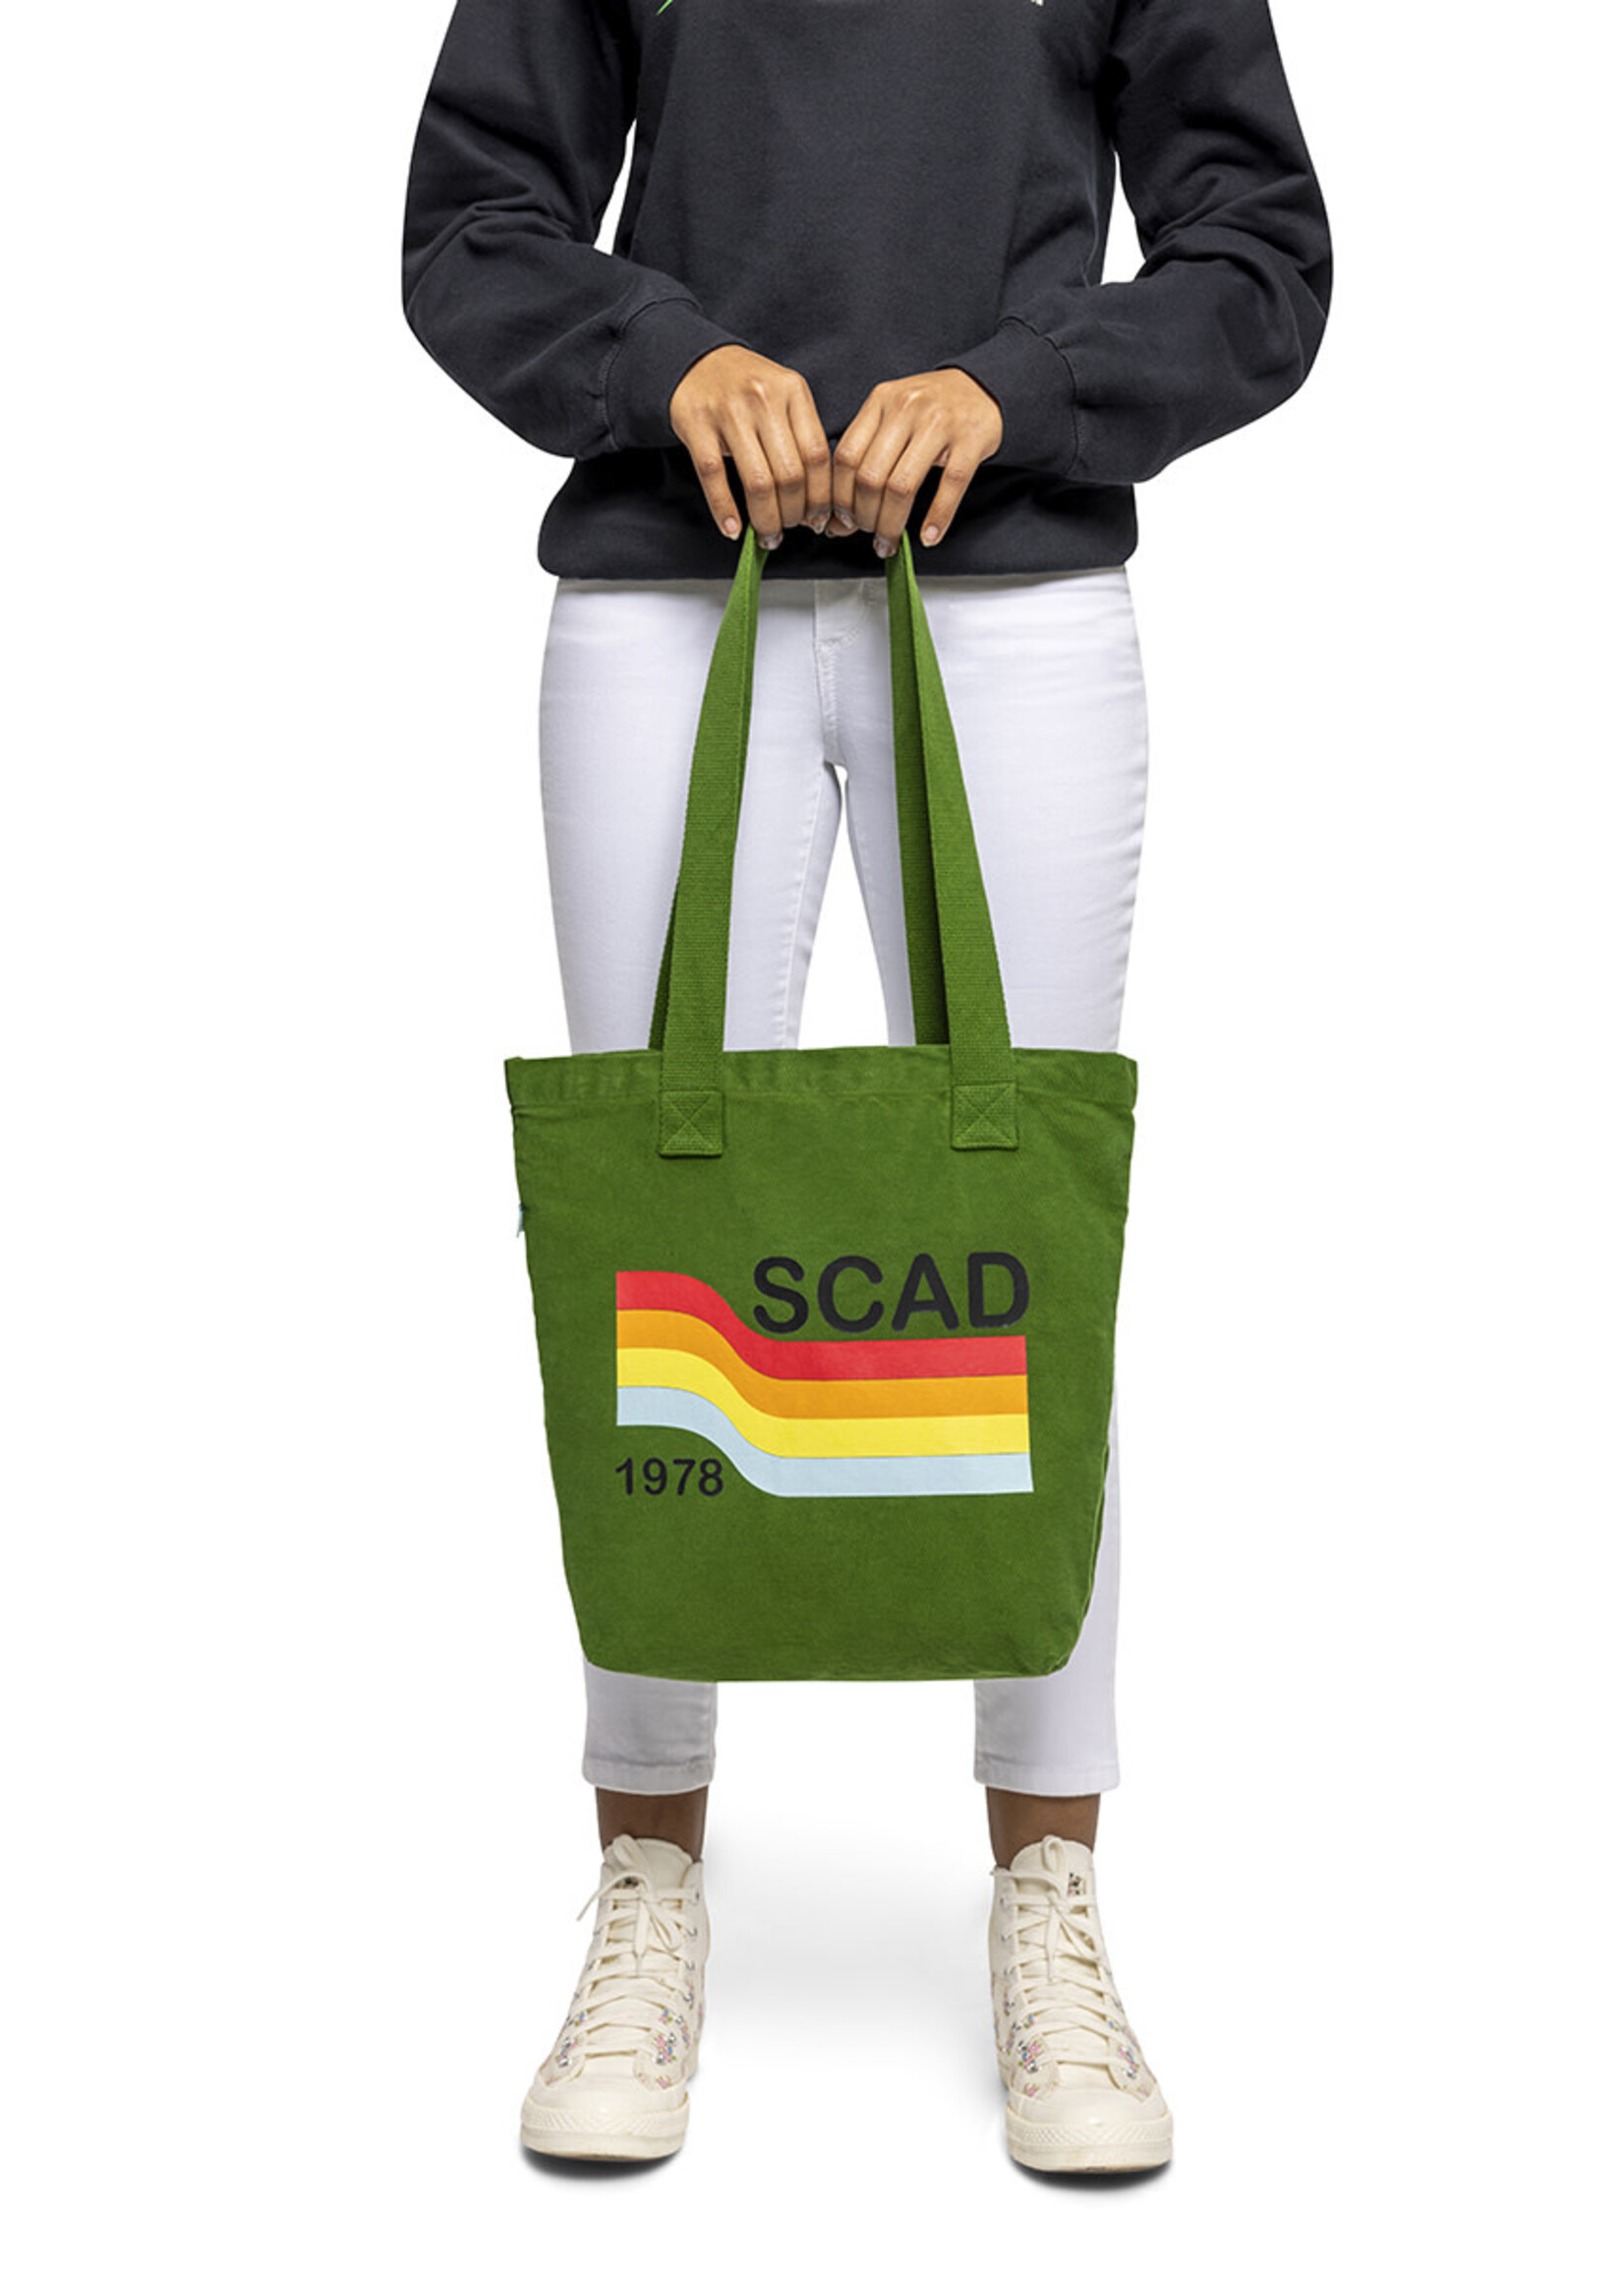 SCAD SCAD 70’s Wave, Kelly Green, Canvas Tote